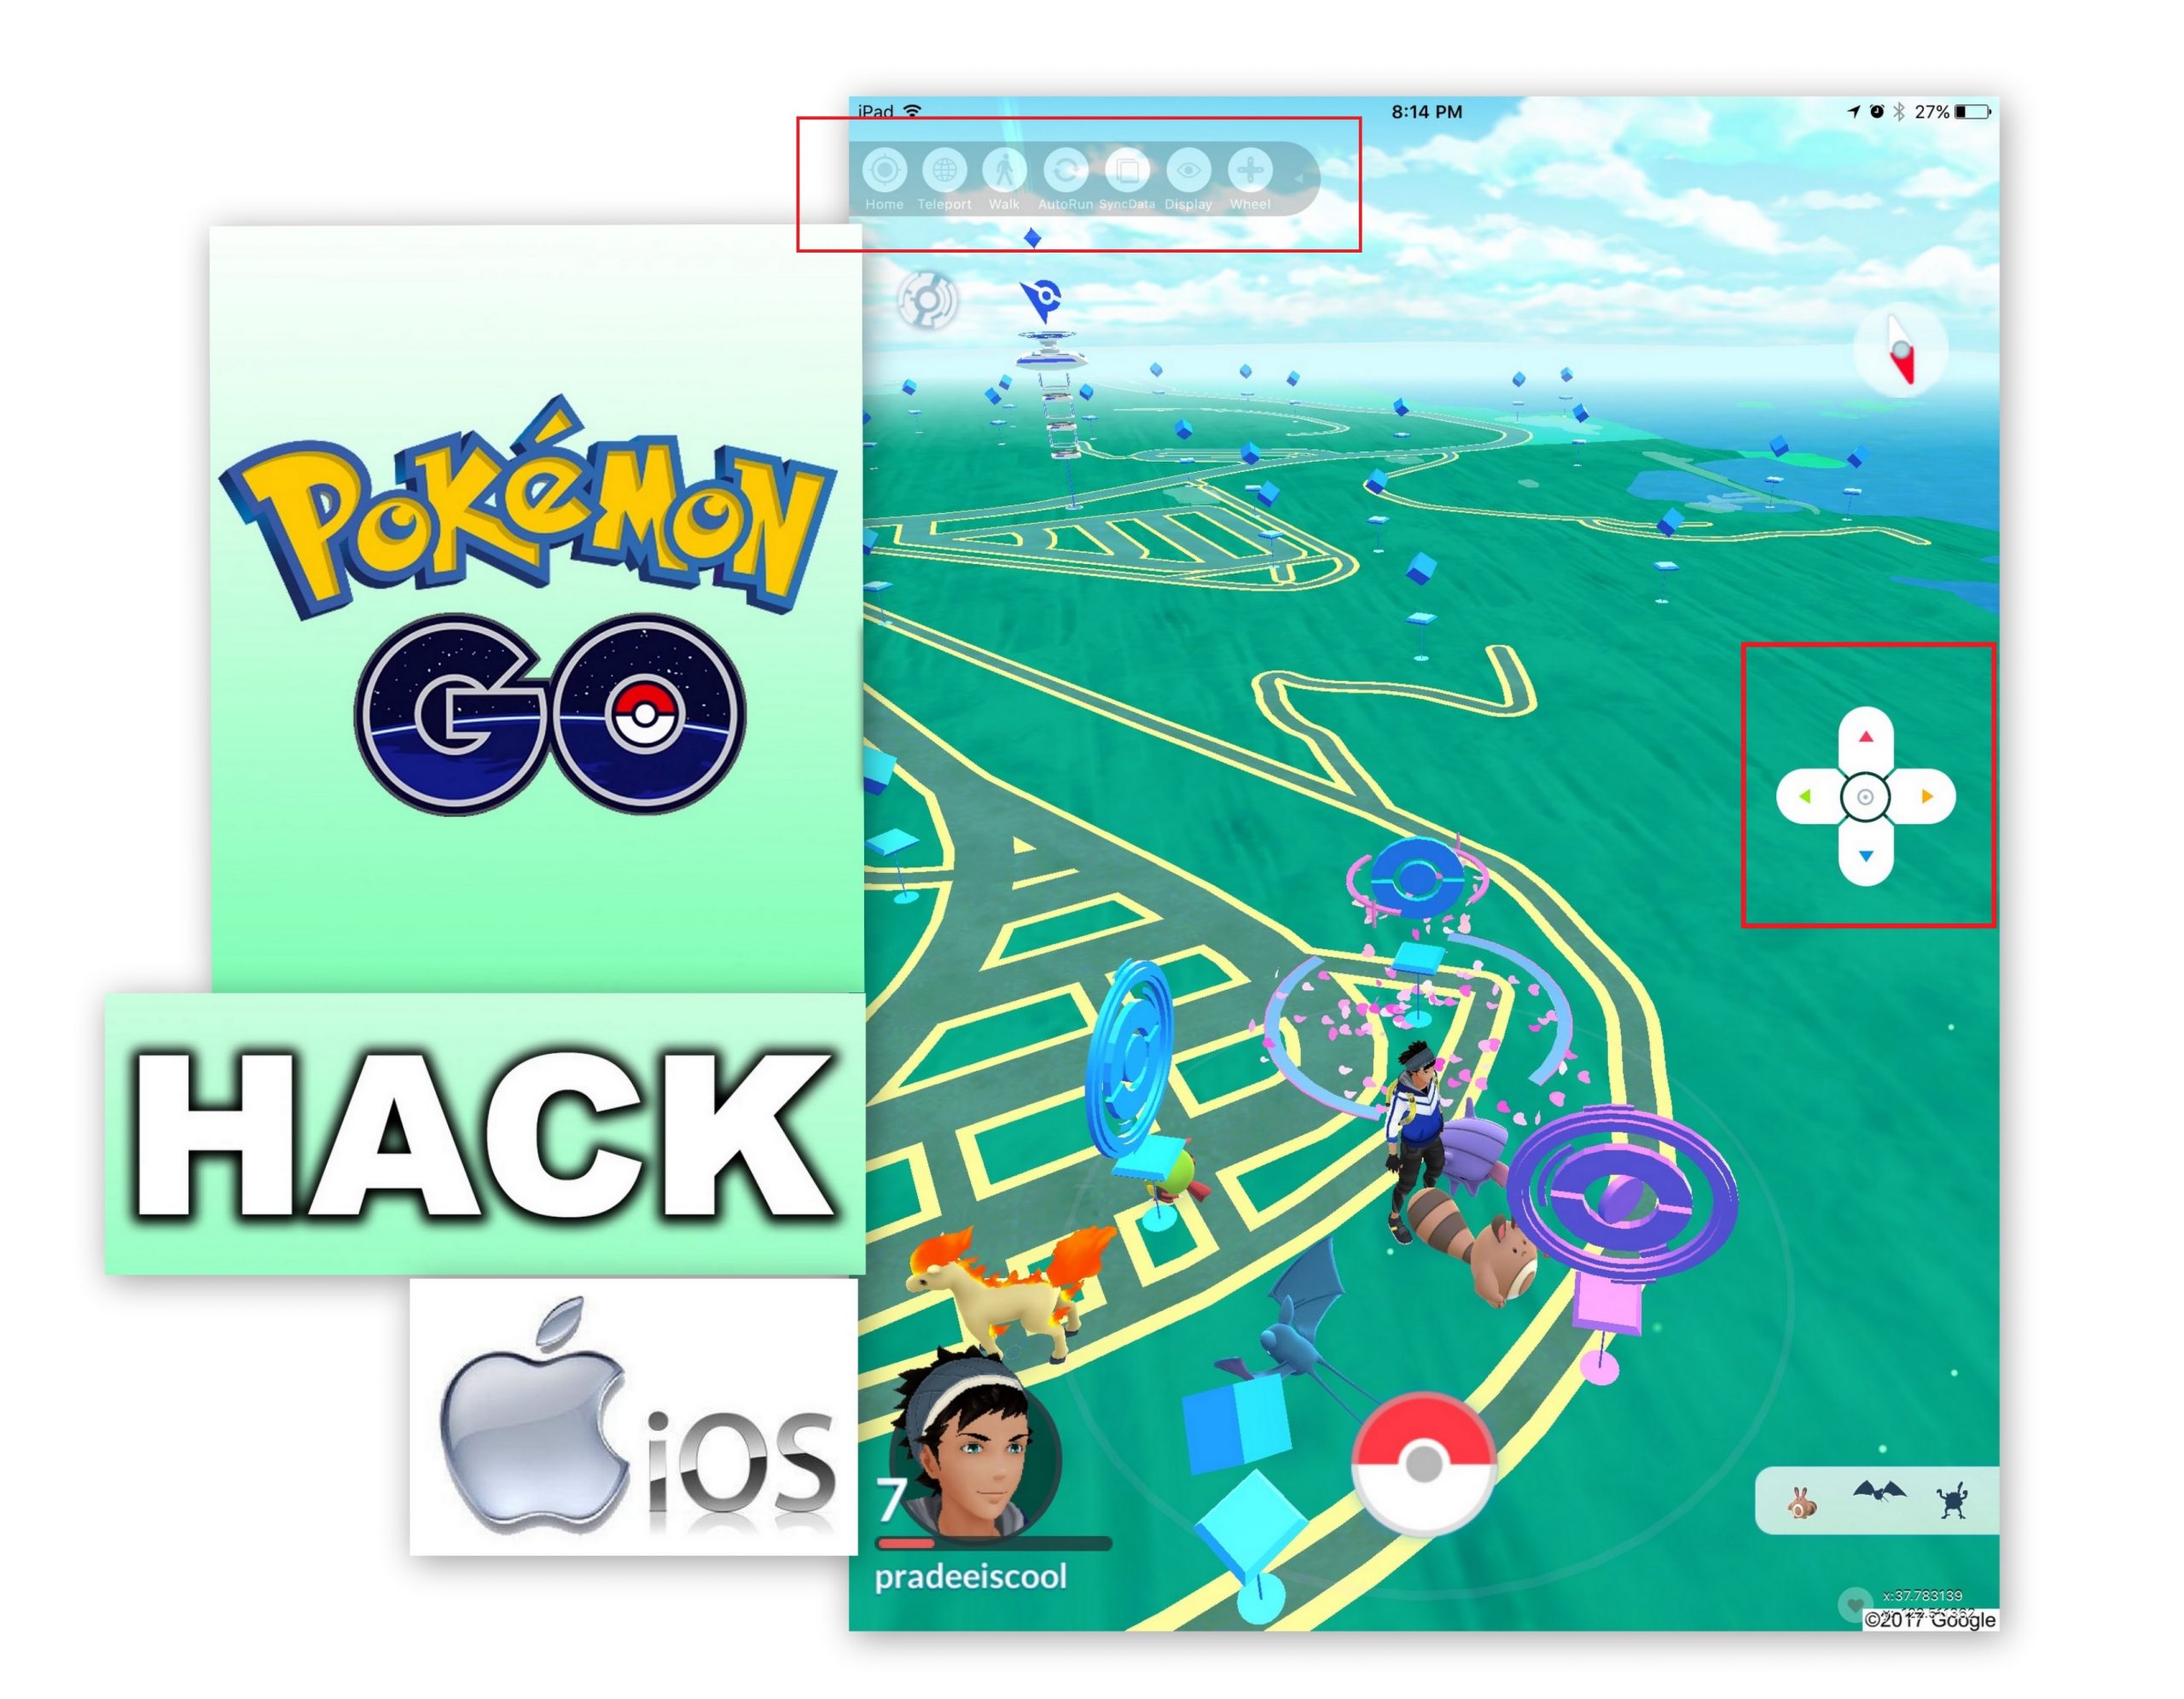 Pokemon Go Hack Latest Version Available For iPhone/iPad ...